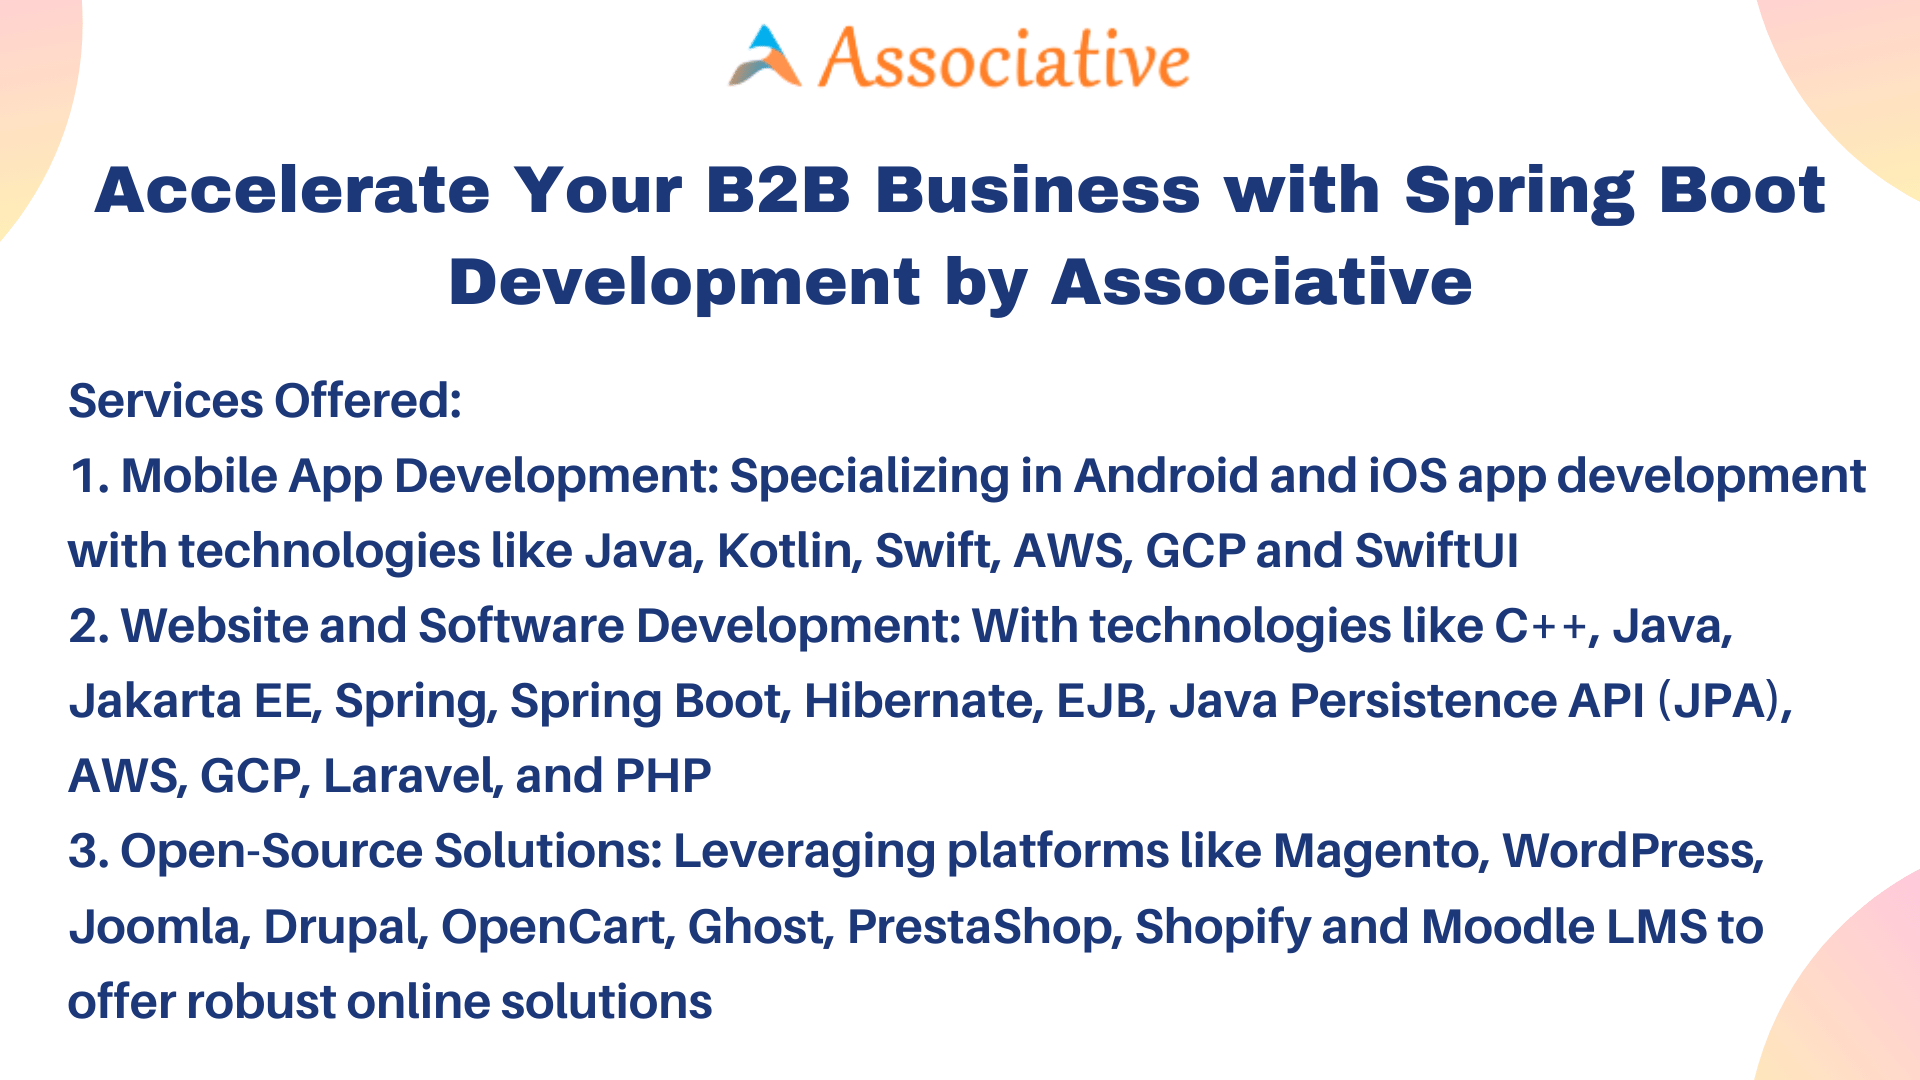 Accelerate Your B2B Business with Spring Boot Development by Associative